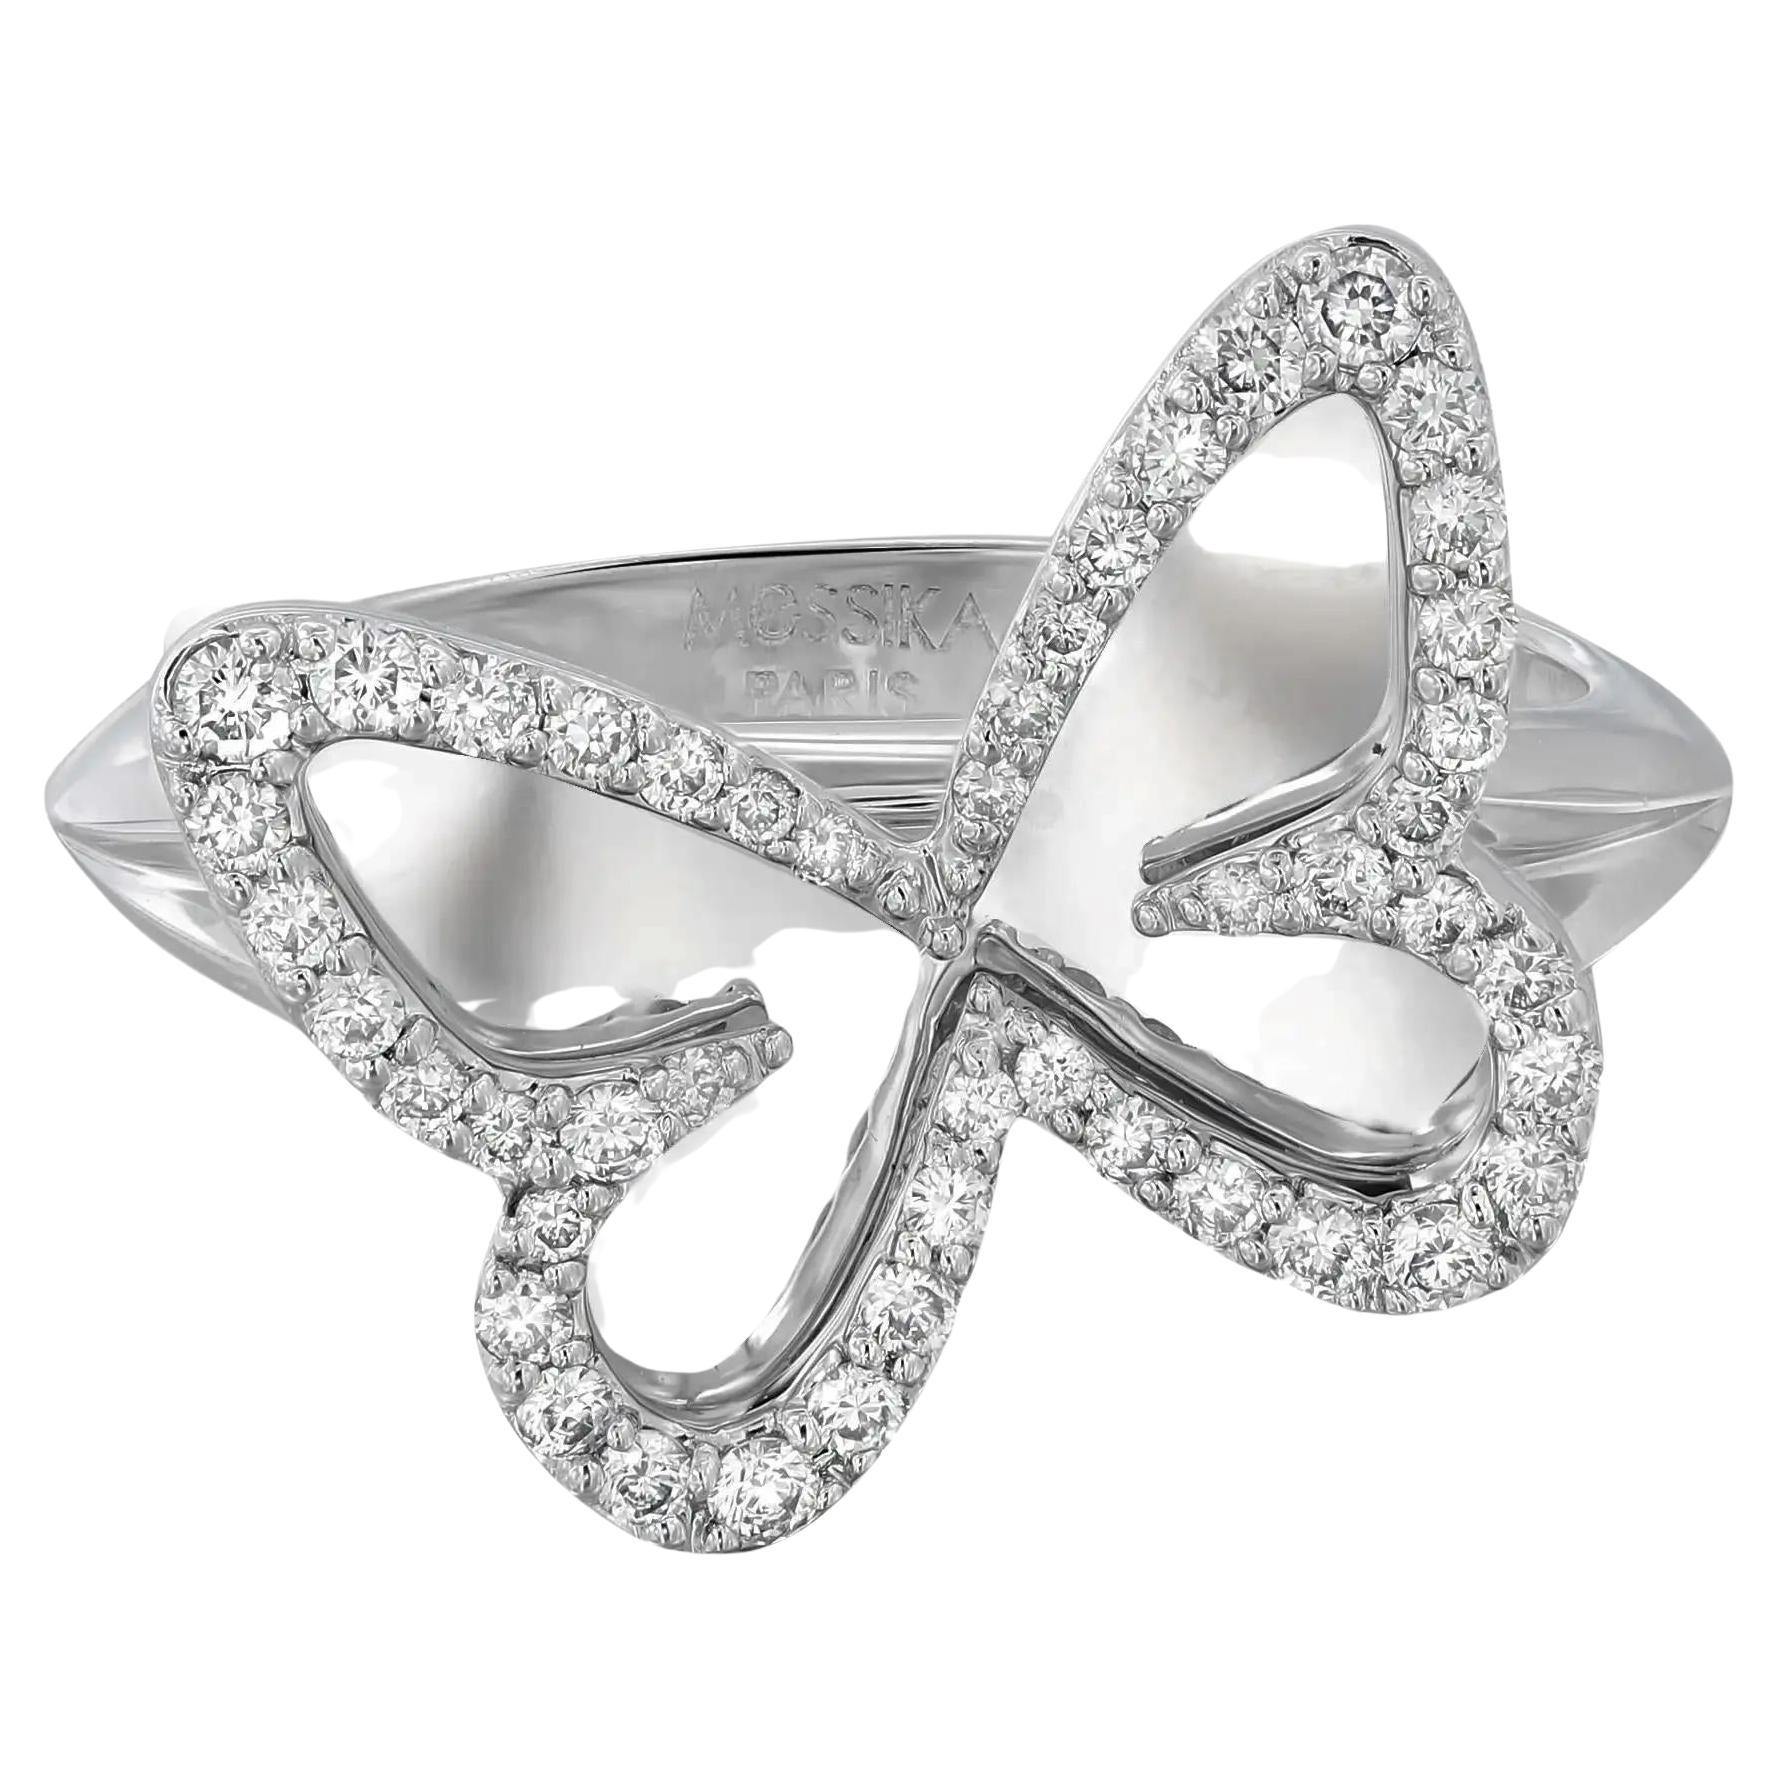 Messika 0.27Cttw Plaque Butterfly Diamond Ring 18K White Gold Size 51 US 5.75 For Sale